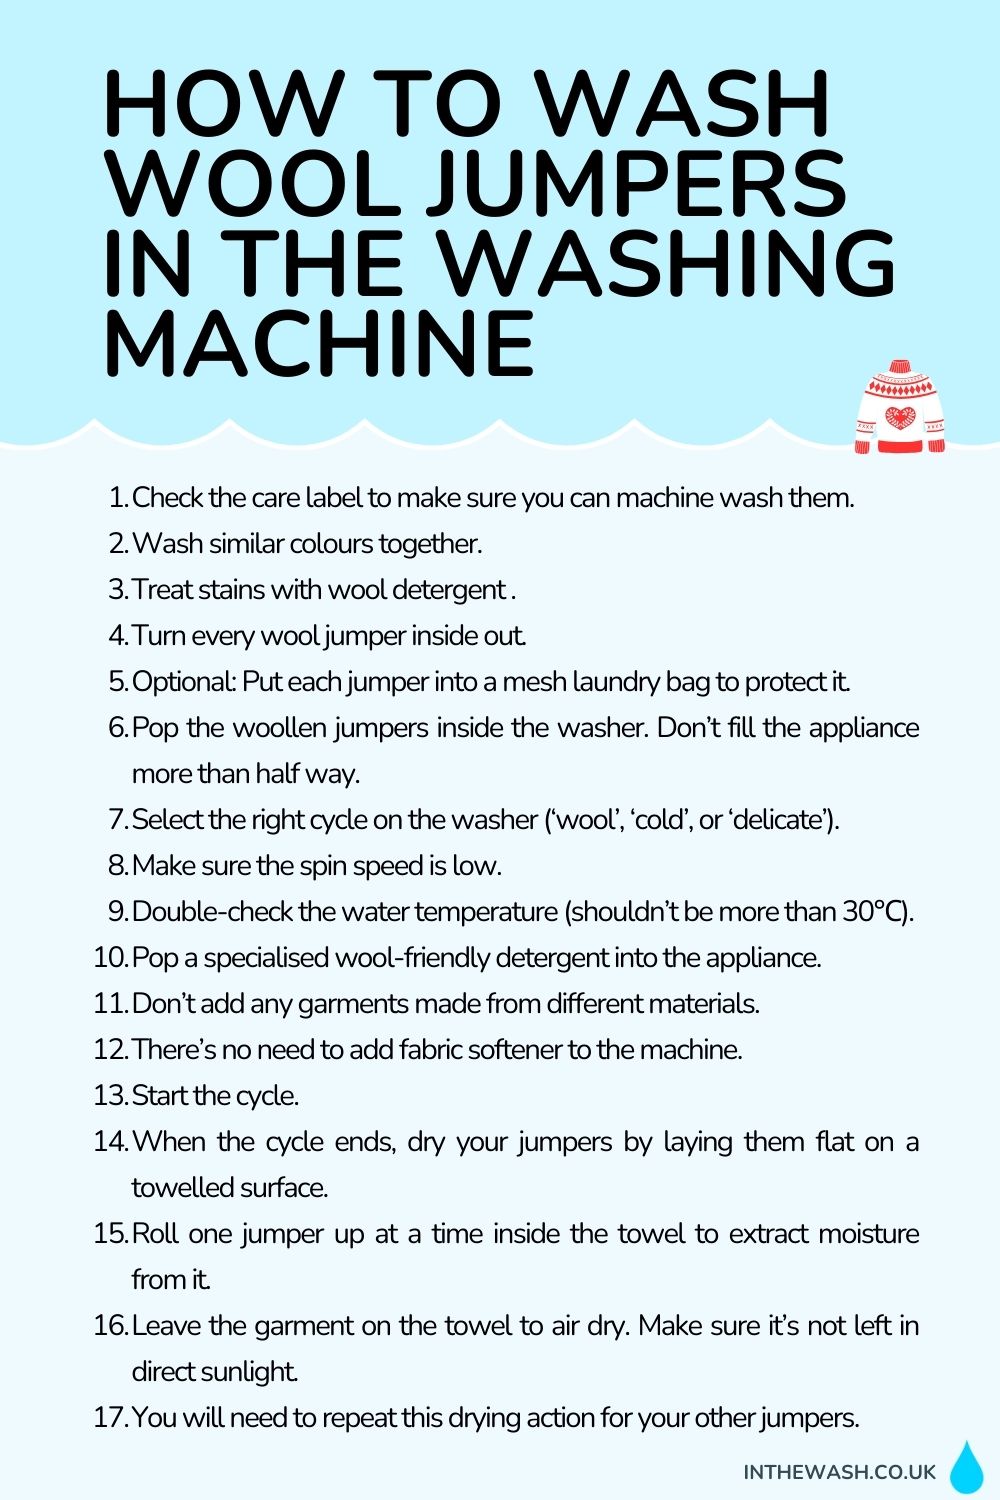 How to wash wool jumpers in the washing machine